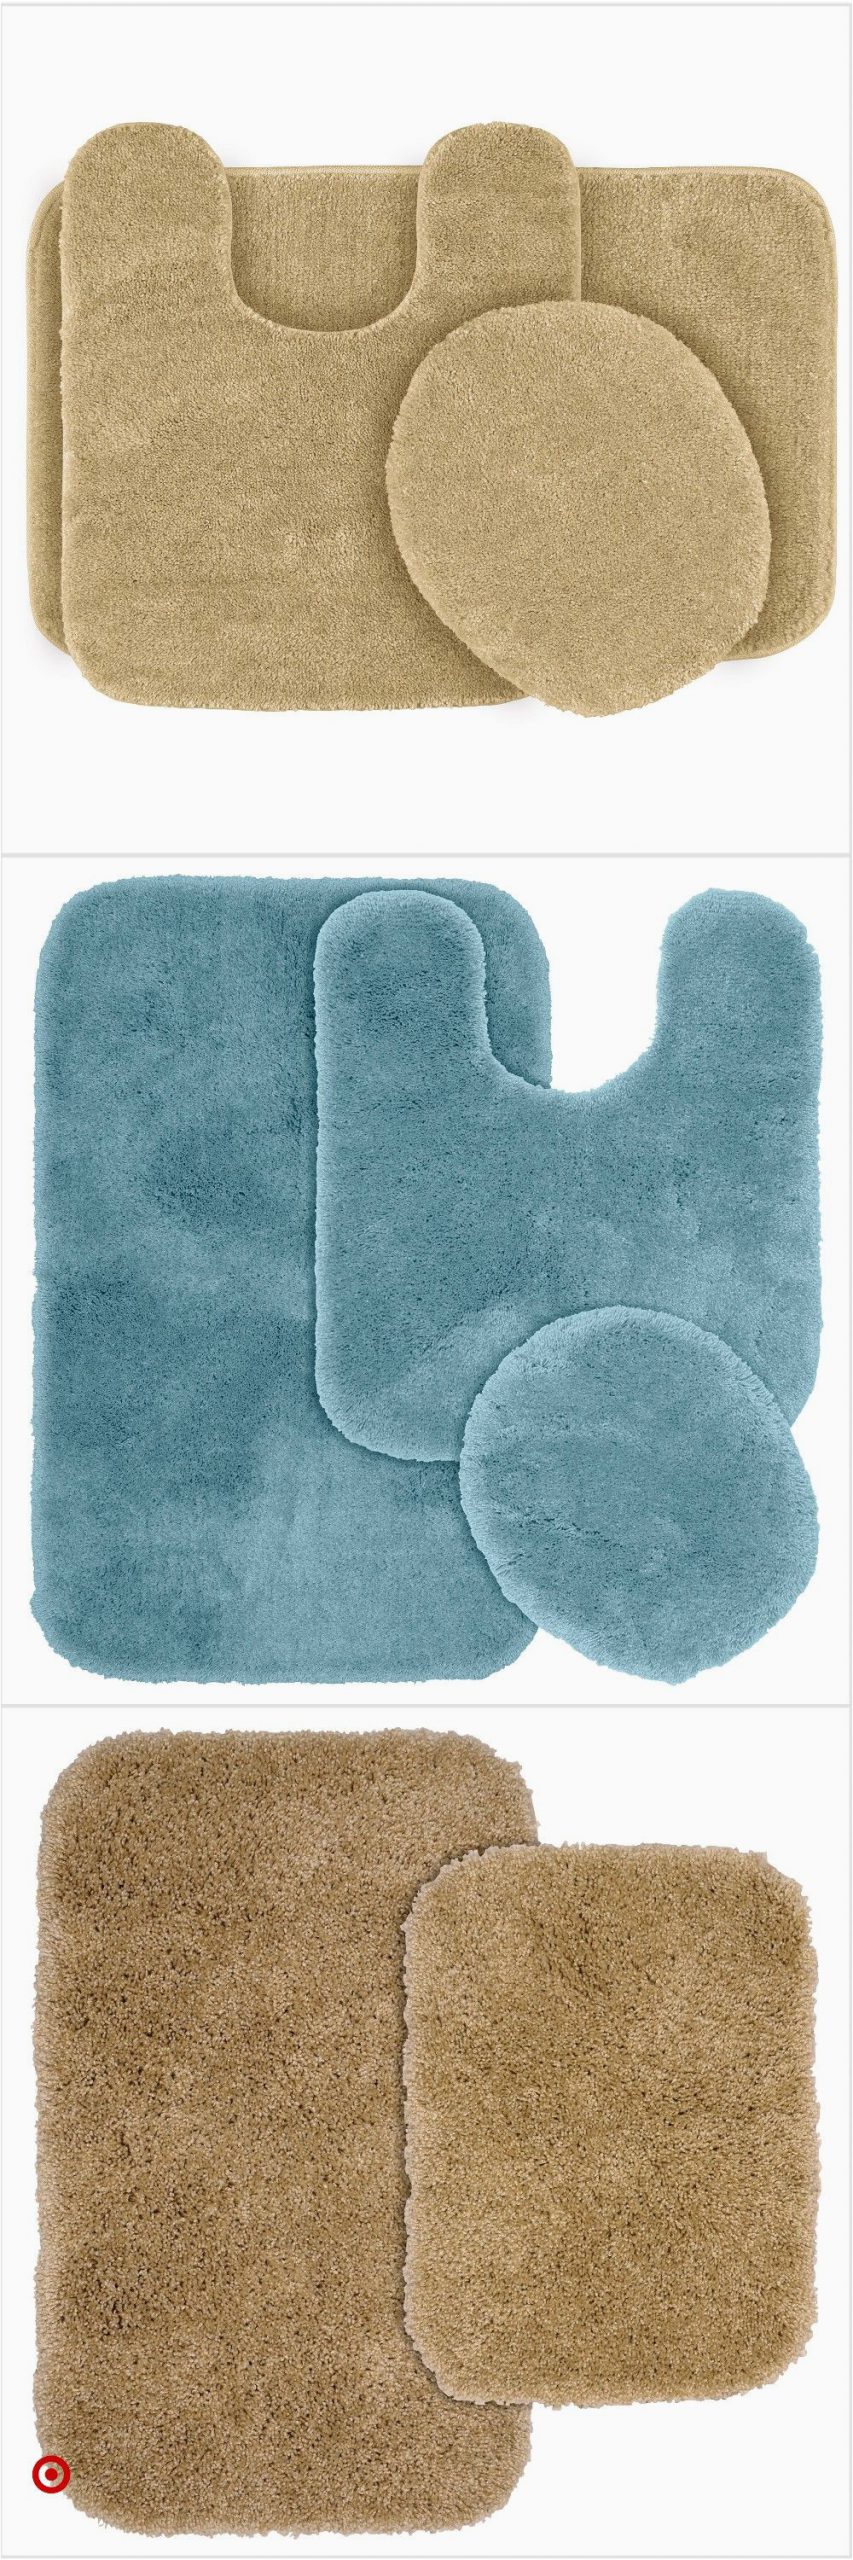 Target Bath Mats and Rugs Shop Tar for Bath & Rug & Set You Will Love at Great Low